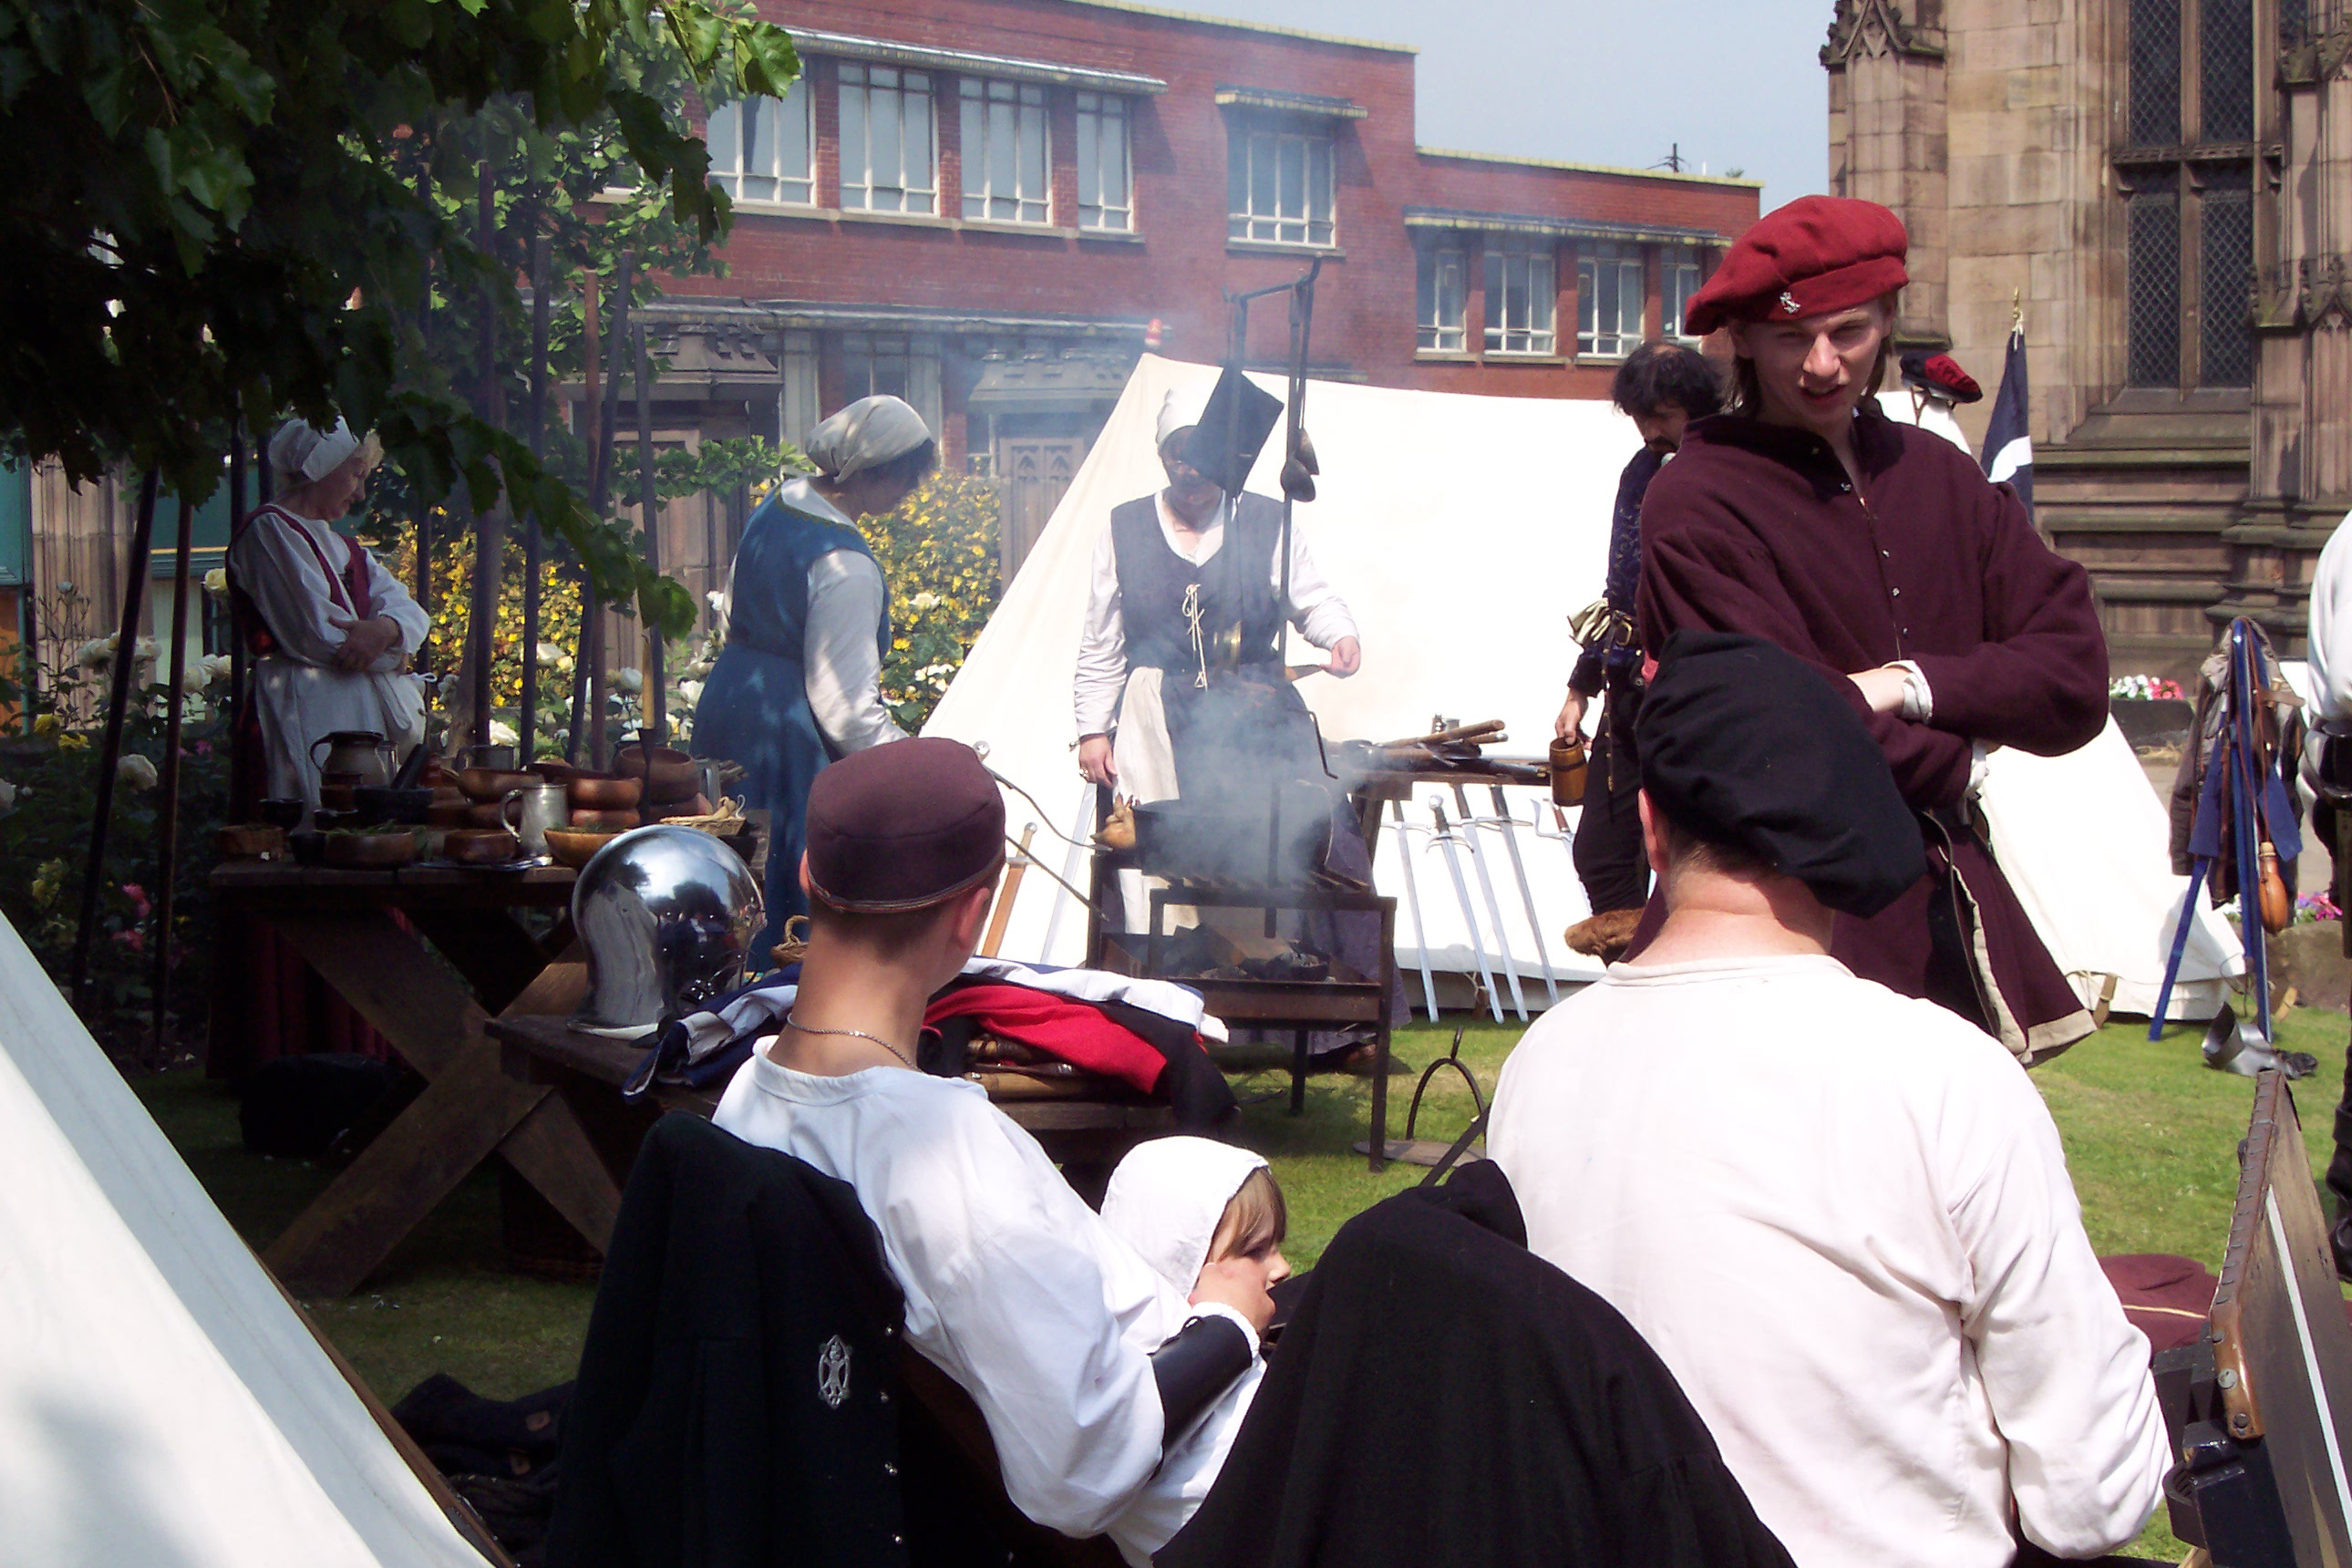 43. Take part in a historic re-enactment